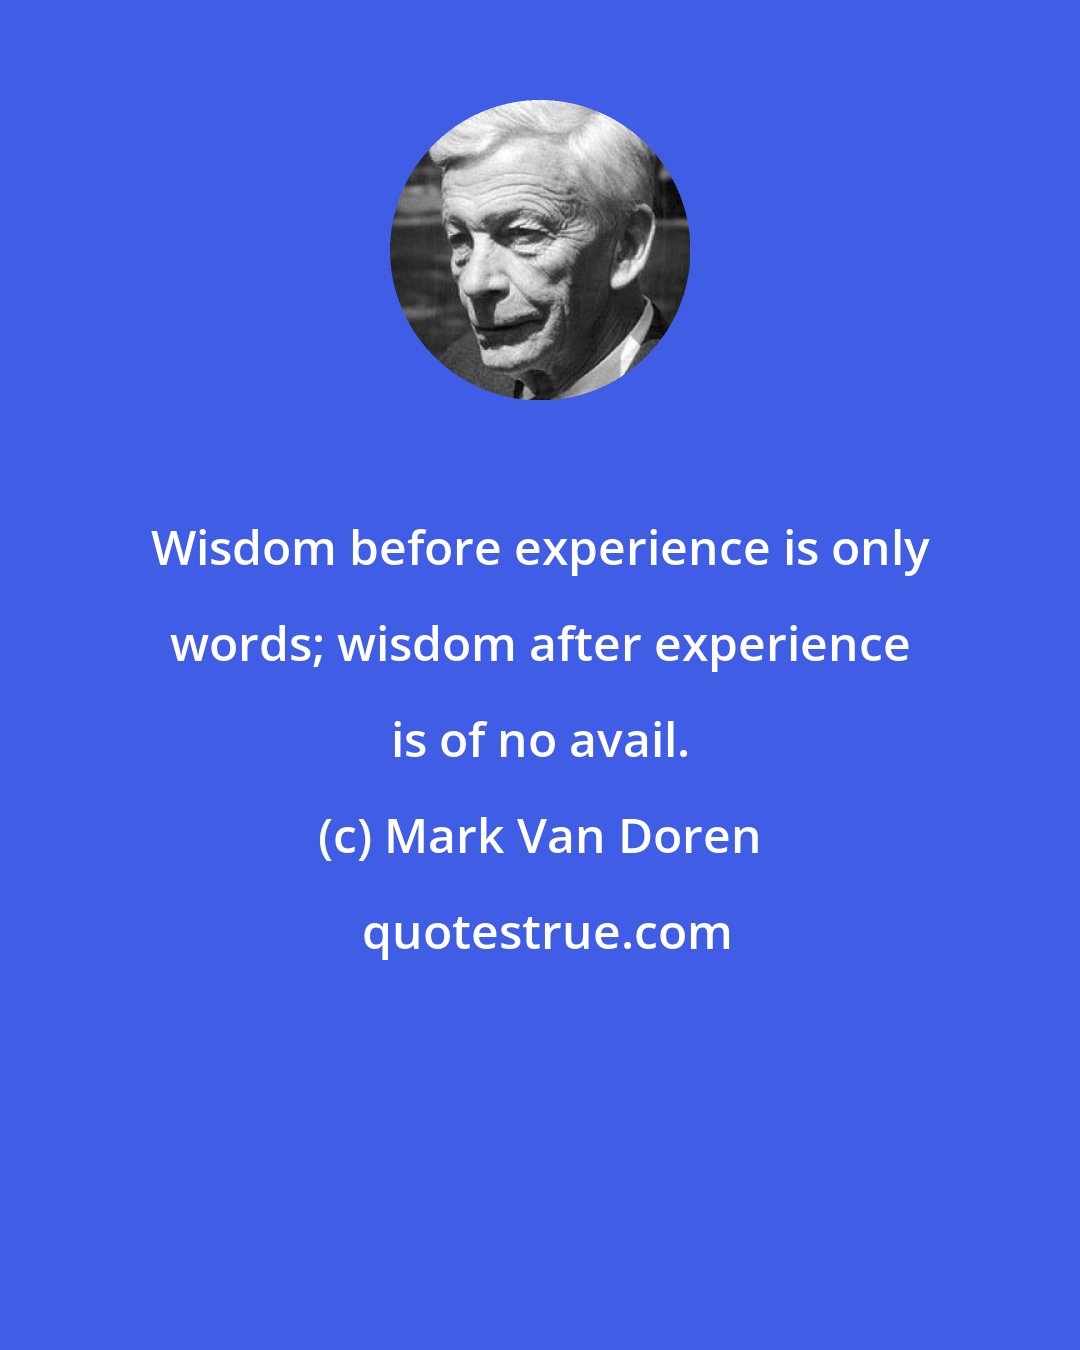 Mark Van Doren: Wisdom before experience is only words; wisdom after experience is of no avail.